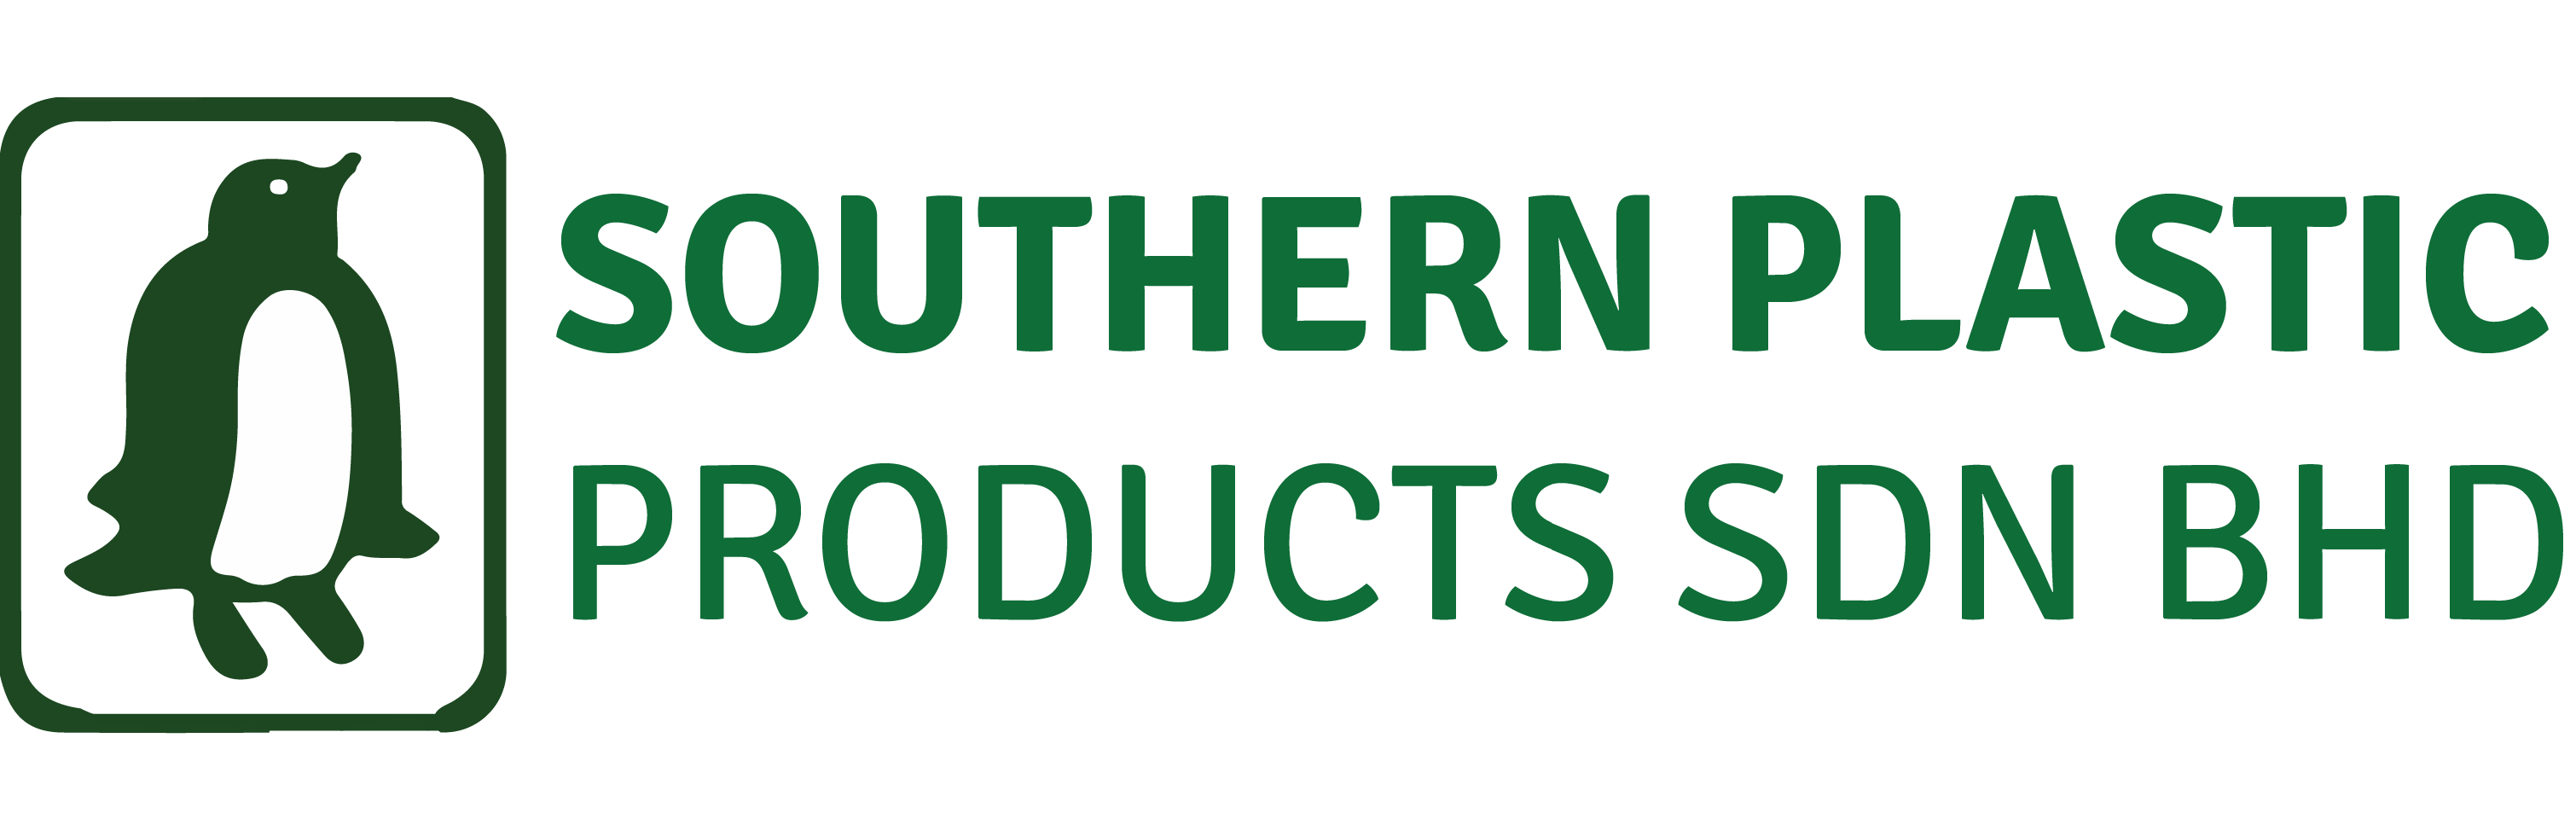 southern-plastic-products-logo-white